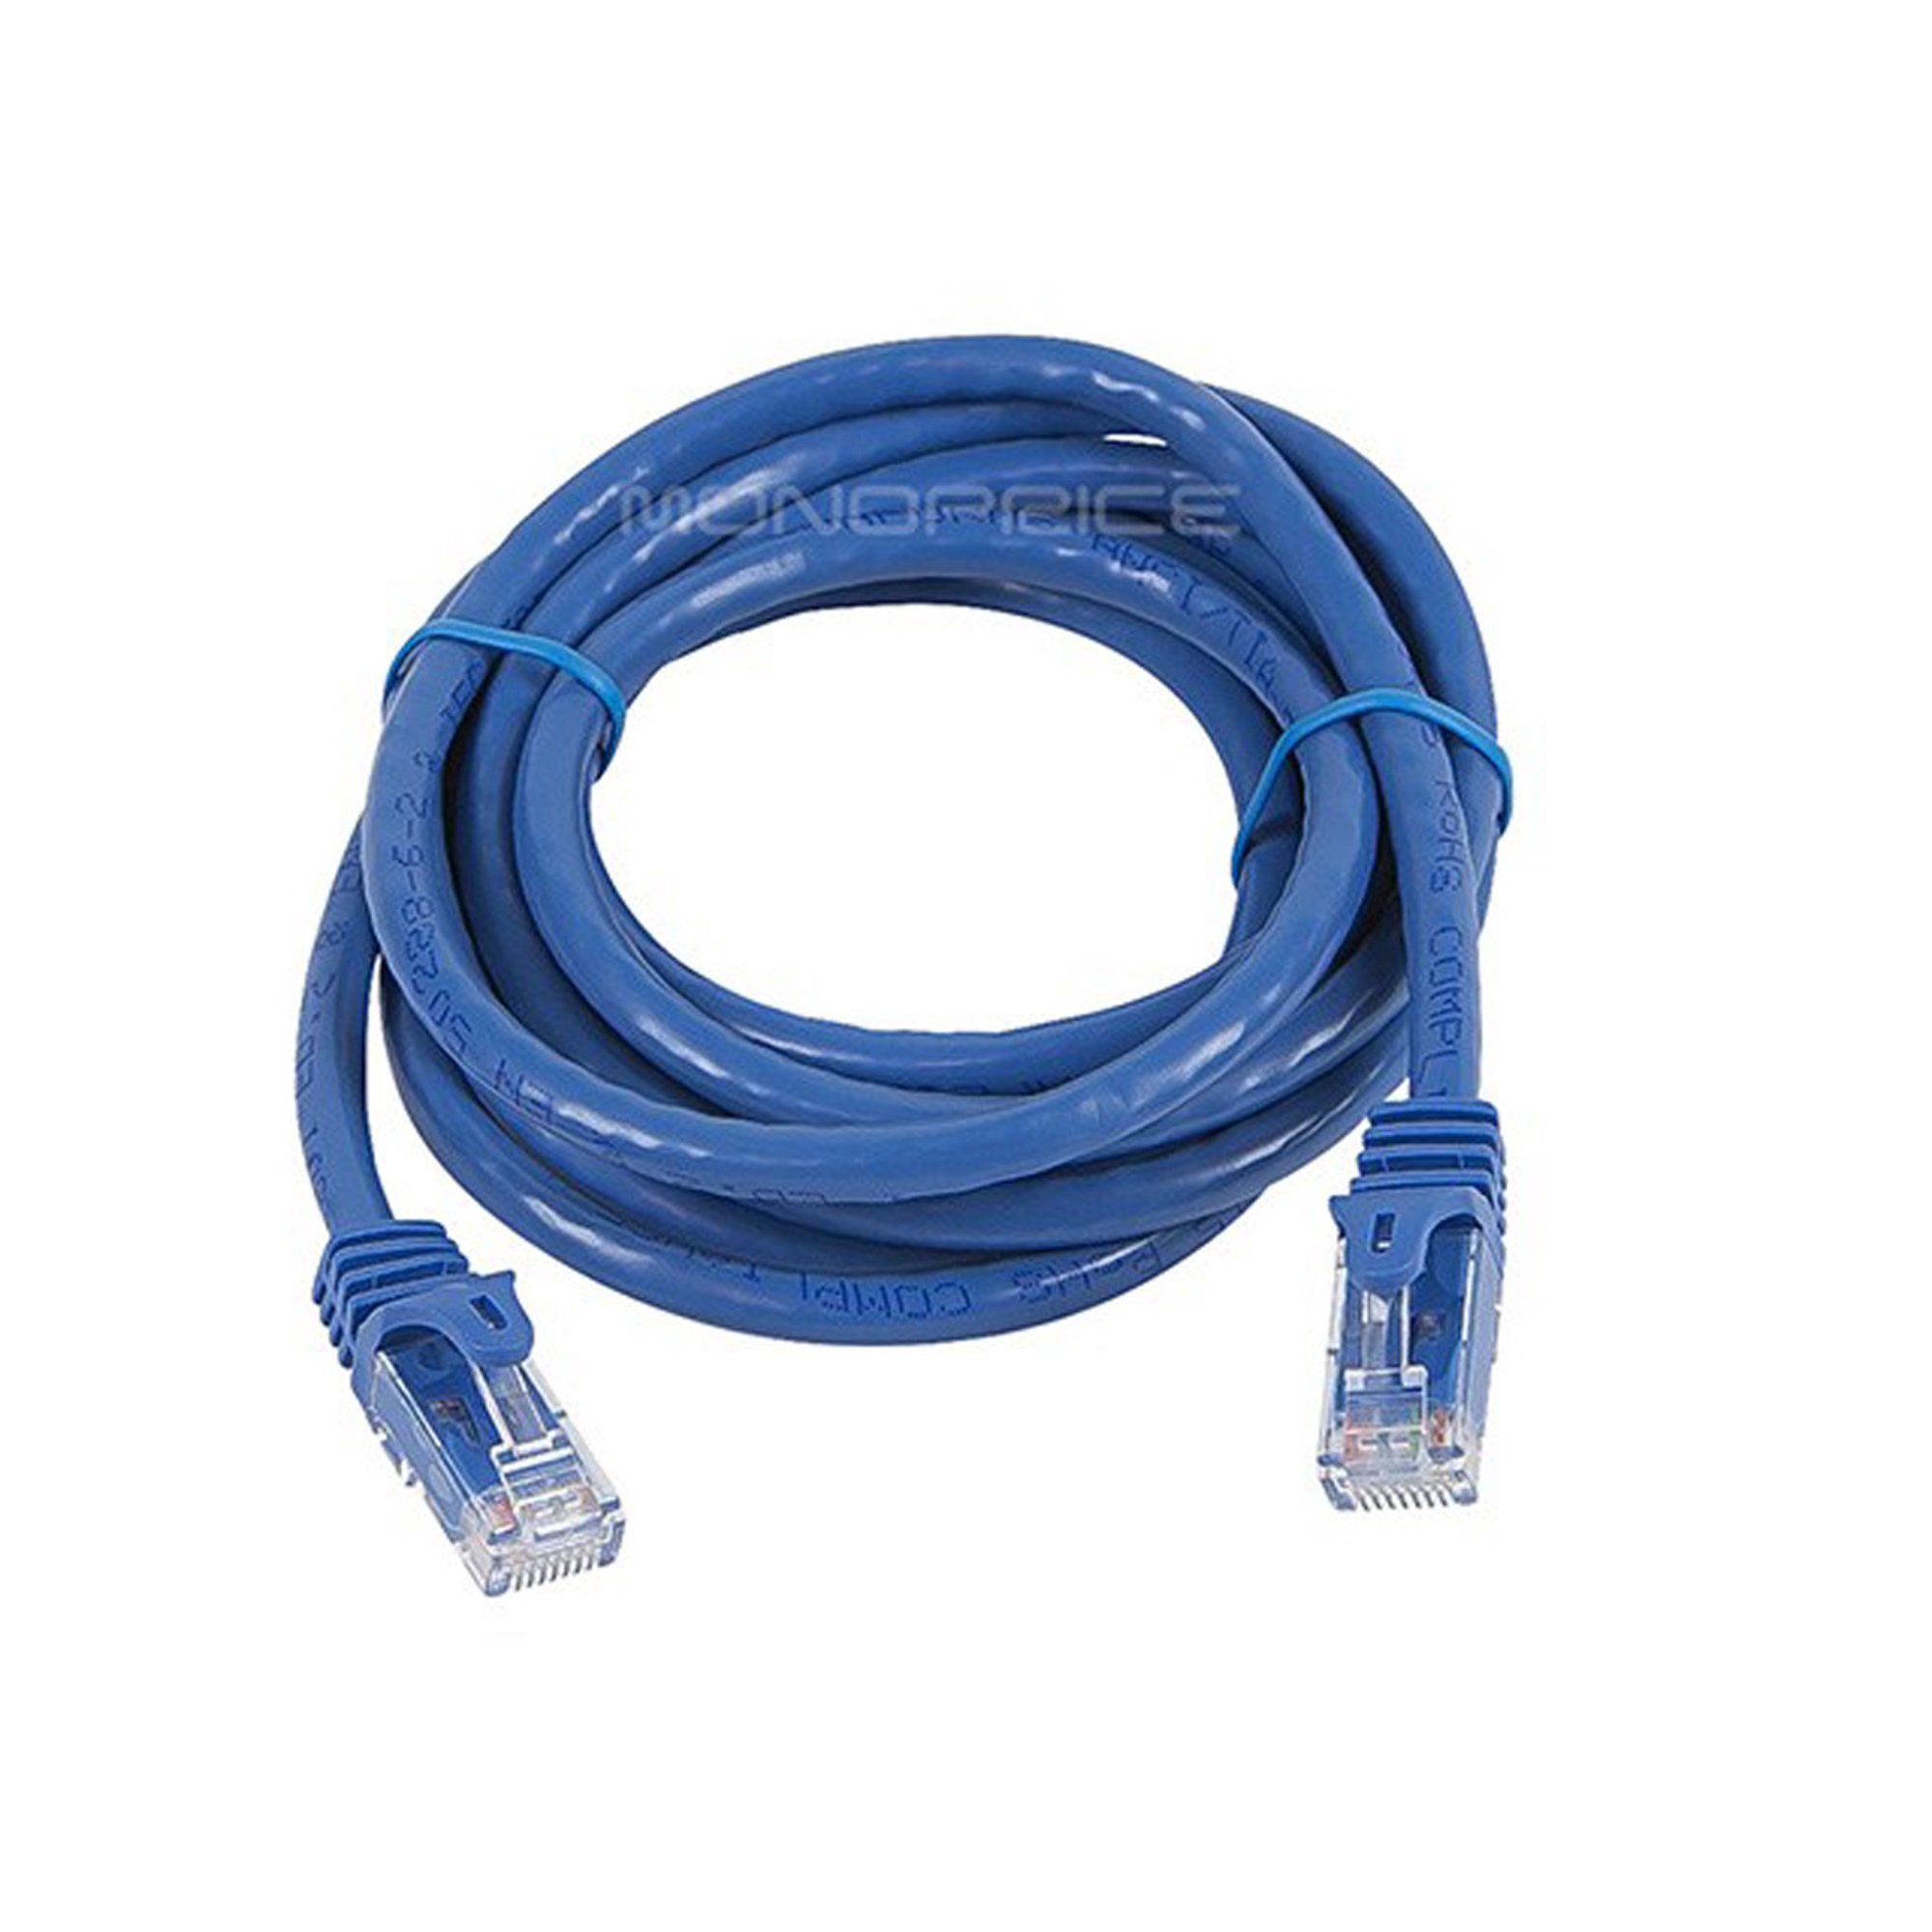 Monoprice Cat6 Ethernet Patch Cable - 7 Feet - Blue | Network Internet Cord - RJ45, Stranded, 550Mhz, UTP, Pure Bare Copper Wire, 24AWG - Flexboot Series